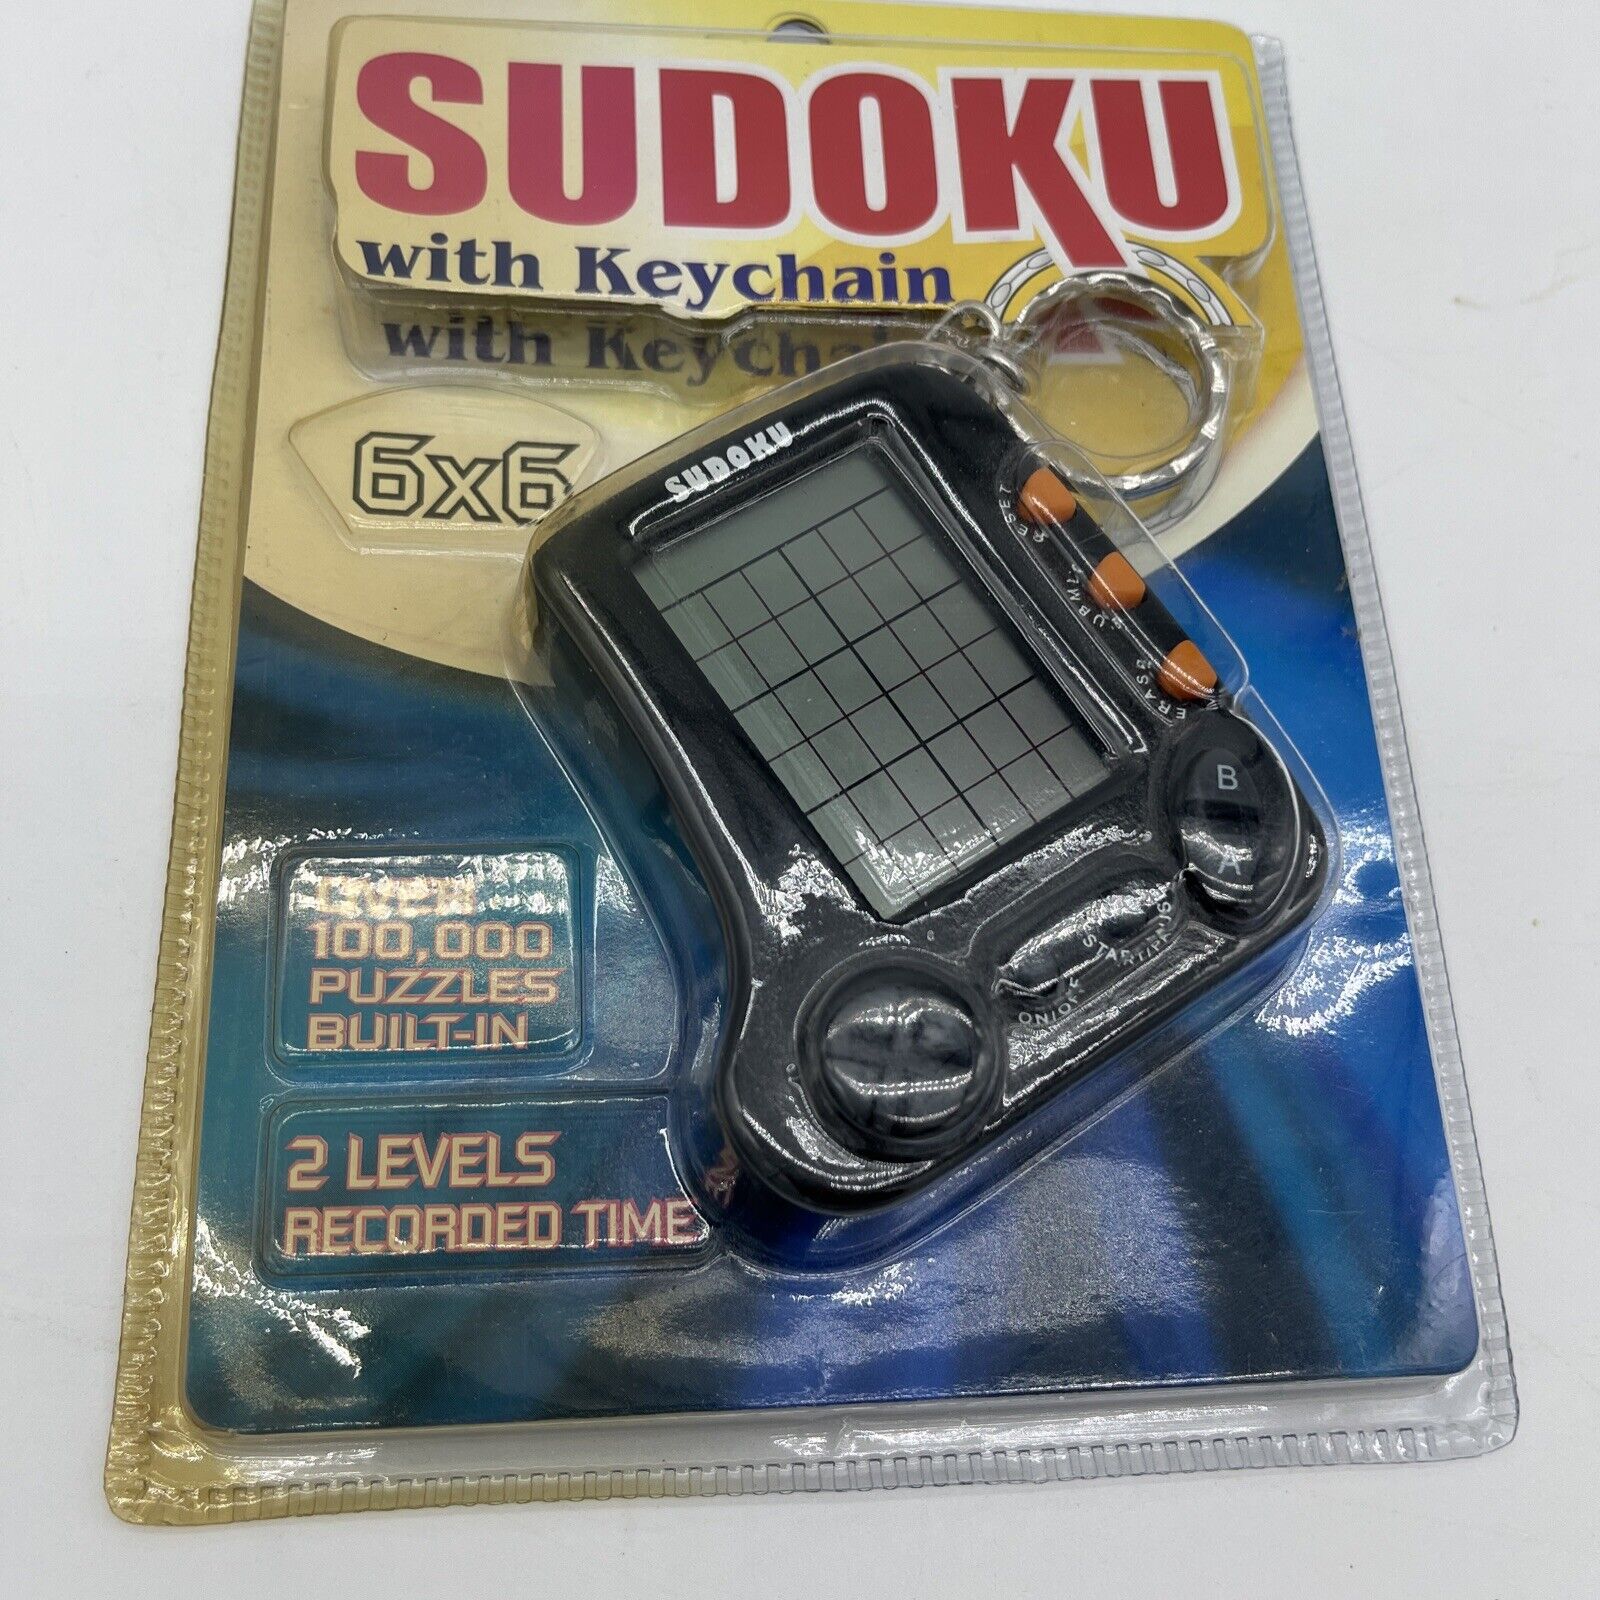 New Sudoku with Key Chain 6x6 Over 100,000 Puzzles Built In 2 Levels Recorded